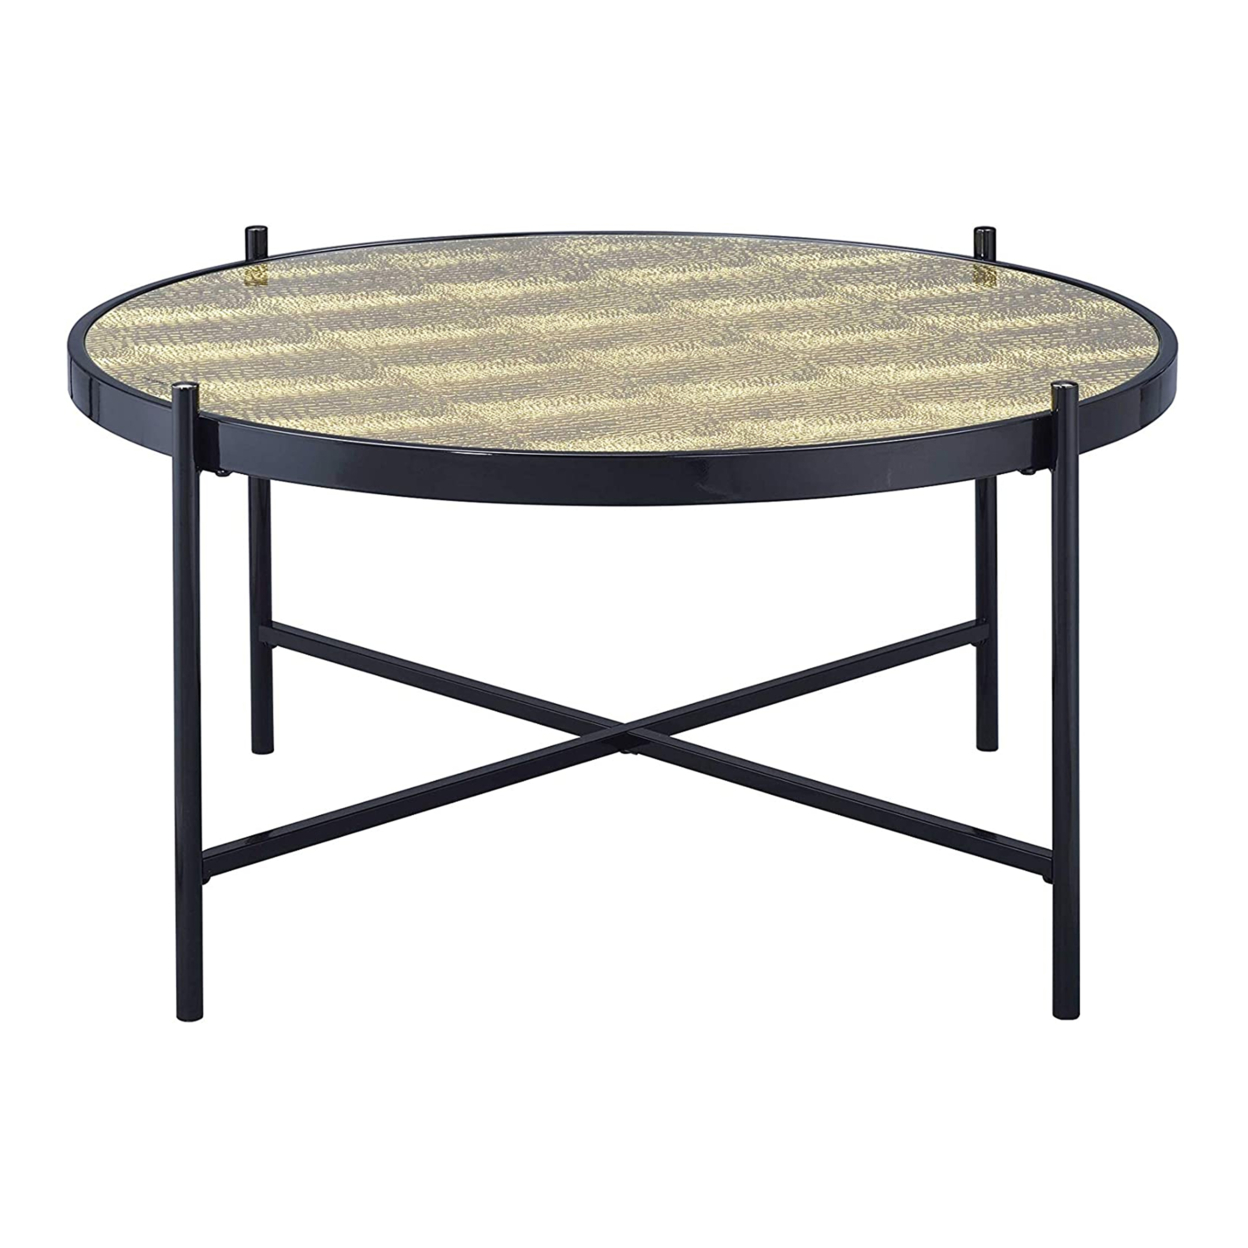 Metal Framed Round Coffee Table With X Shaped Support Crossbar, Brown And Black- Saltoro Sherpi